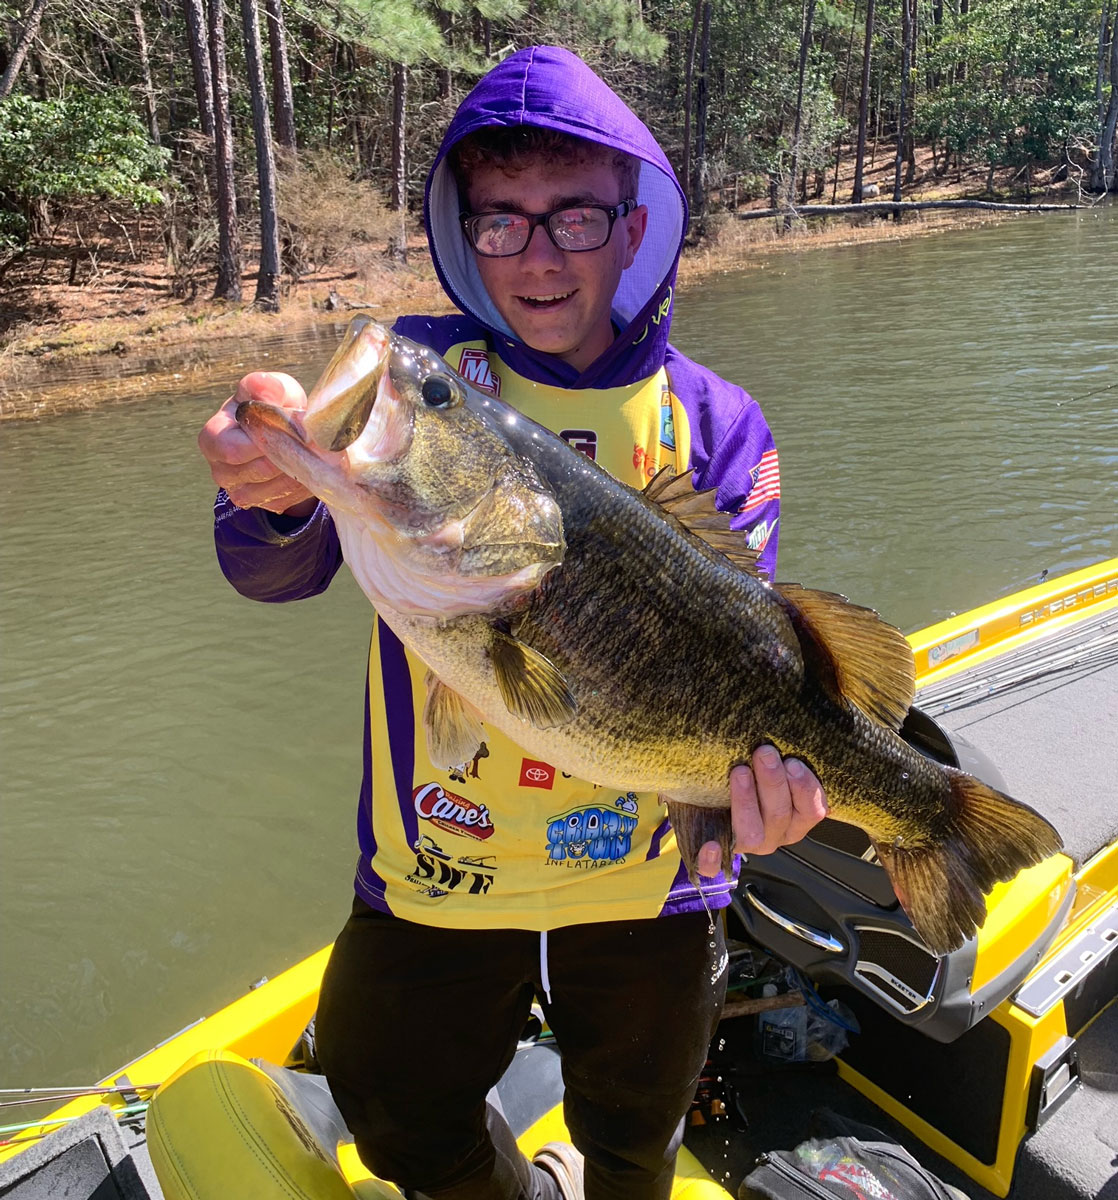 Ross Kliebert caught this huge 12.45-pound Caney lunker. His fishing partner Zane Zeringue lipped the bass and got him in the boat for the team.